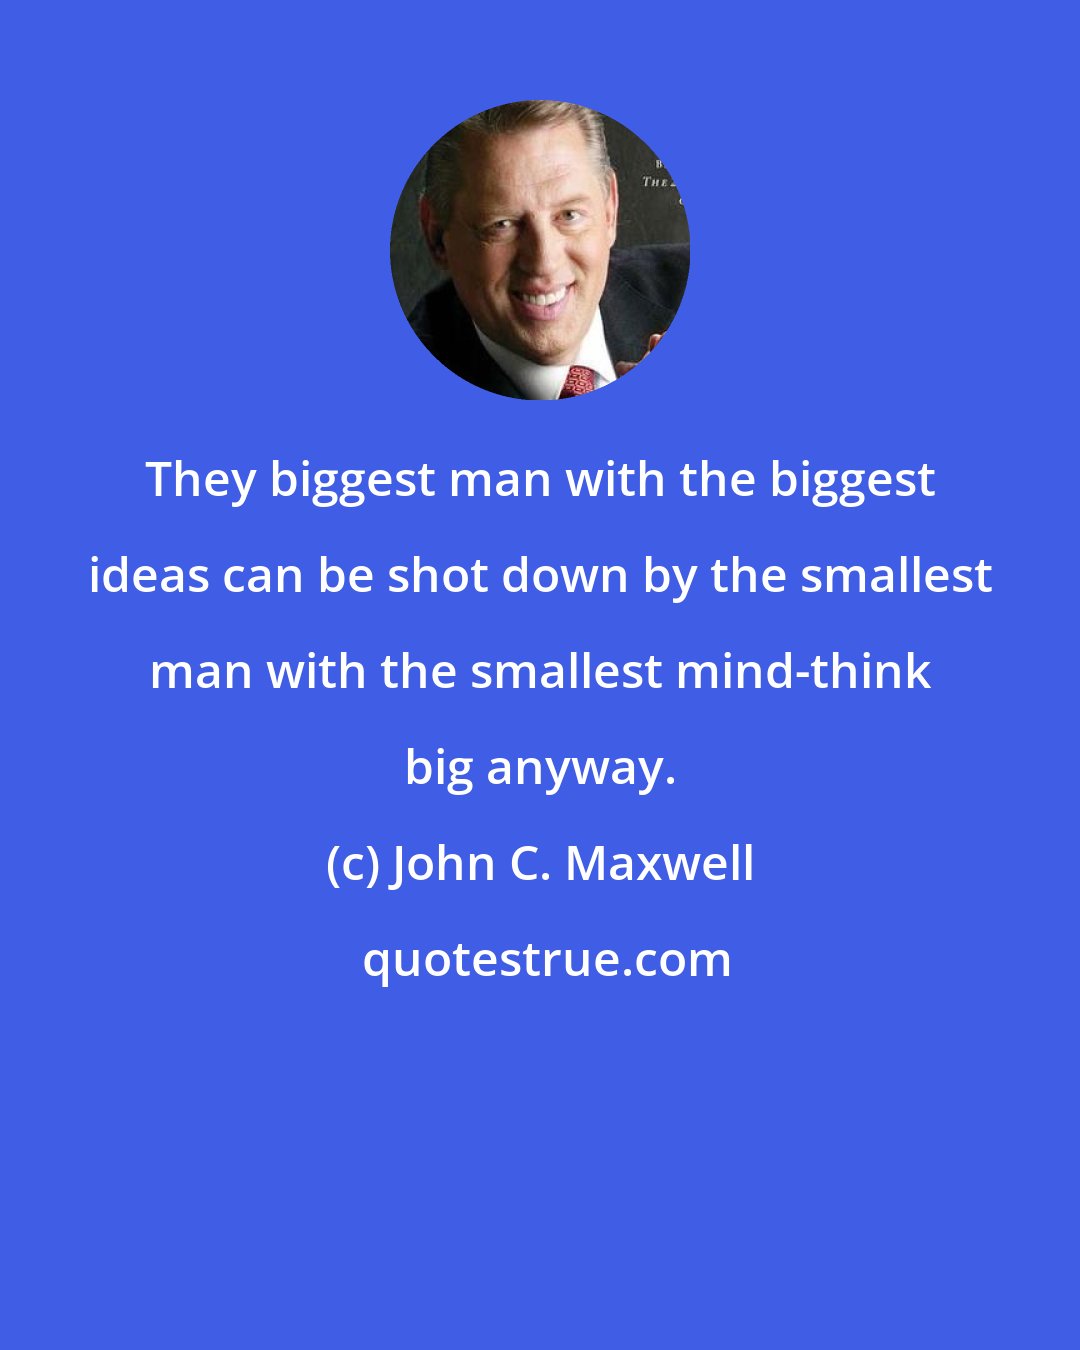 John C. Maxwell: They biggest man with the biggest ideas can be shot down by the smallest man with the smallest mind-think big anyway.